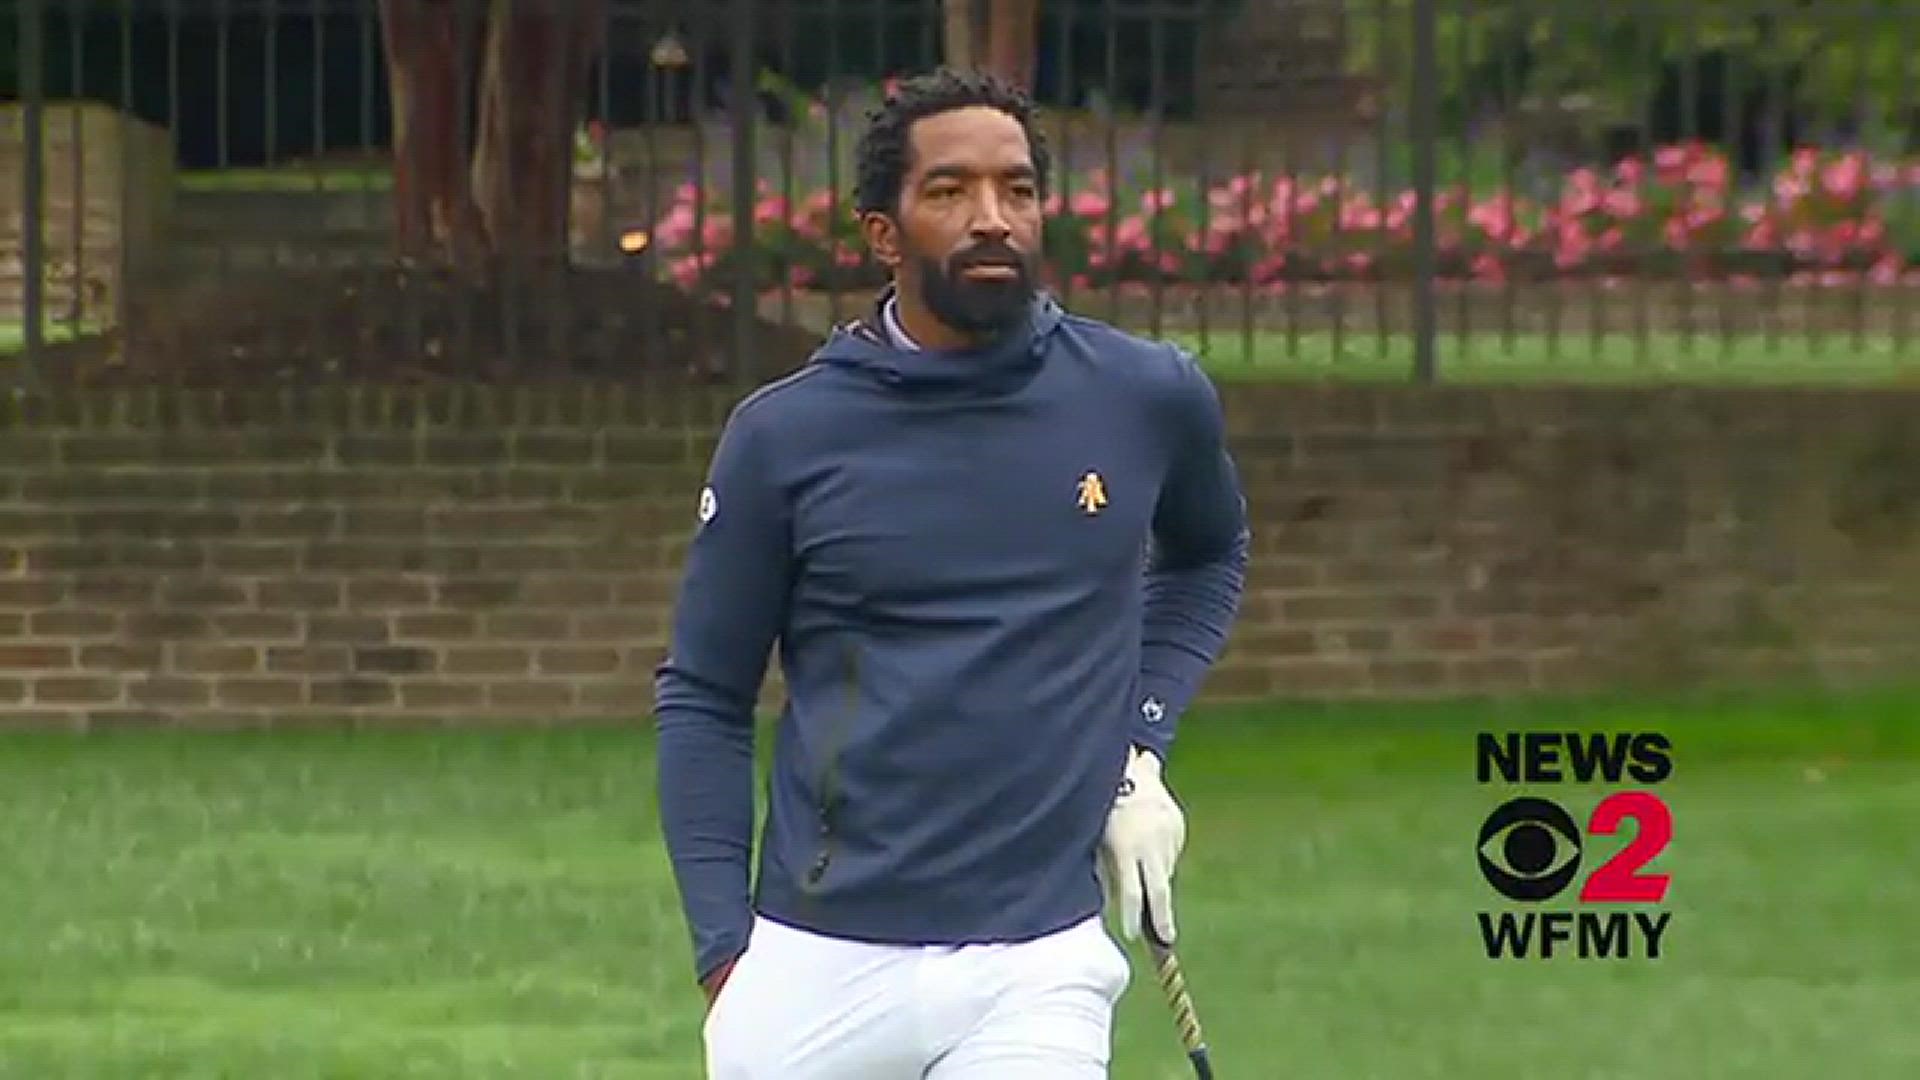 We followed 16-year NBA veteran J.R. Smith for the first five holes of his first tournament as a member of the NC A&T golf team. Here are a few highlights.